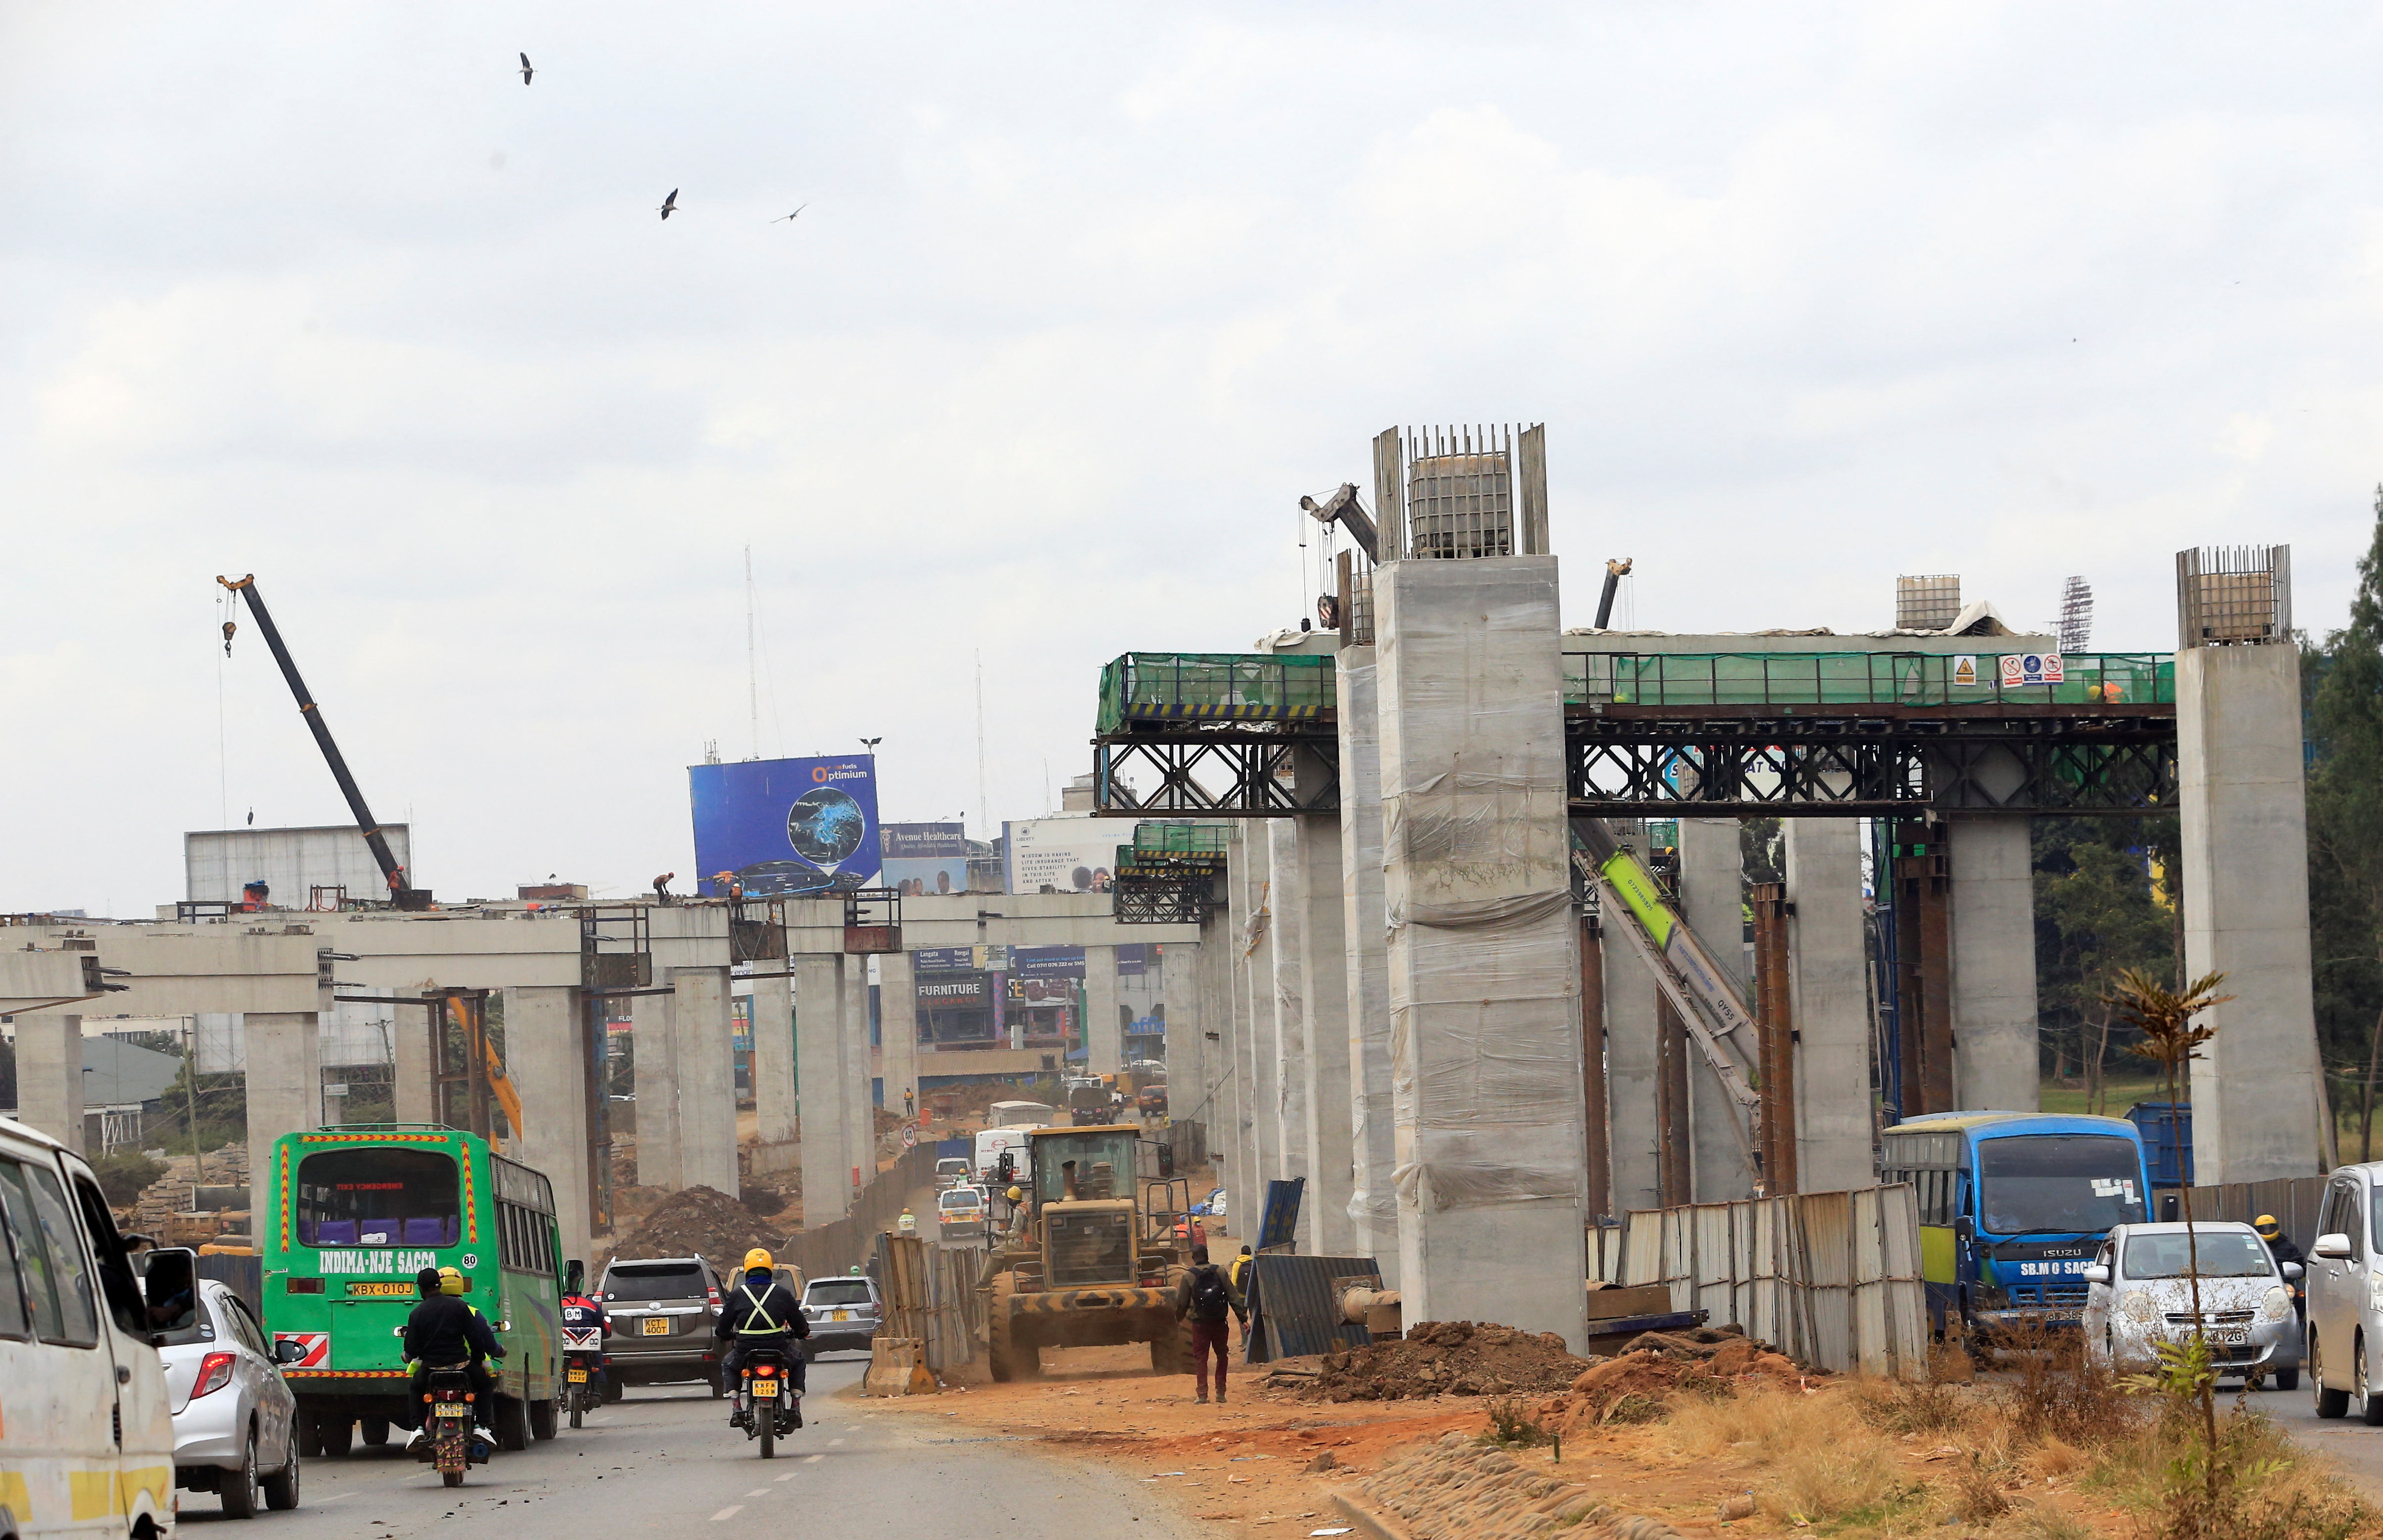 Motorists drive on the controlled section during the construction of the Nairobi Expressway in Nairobi